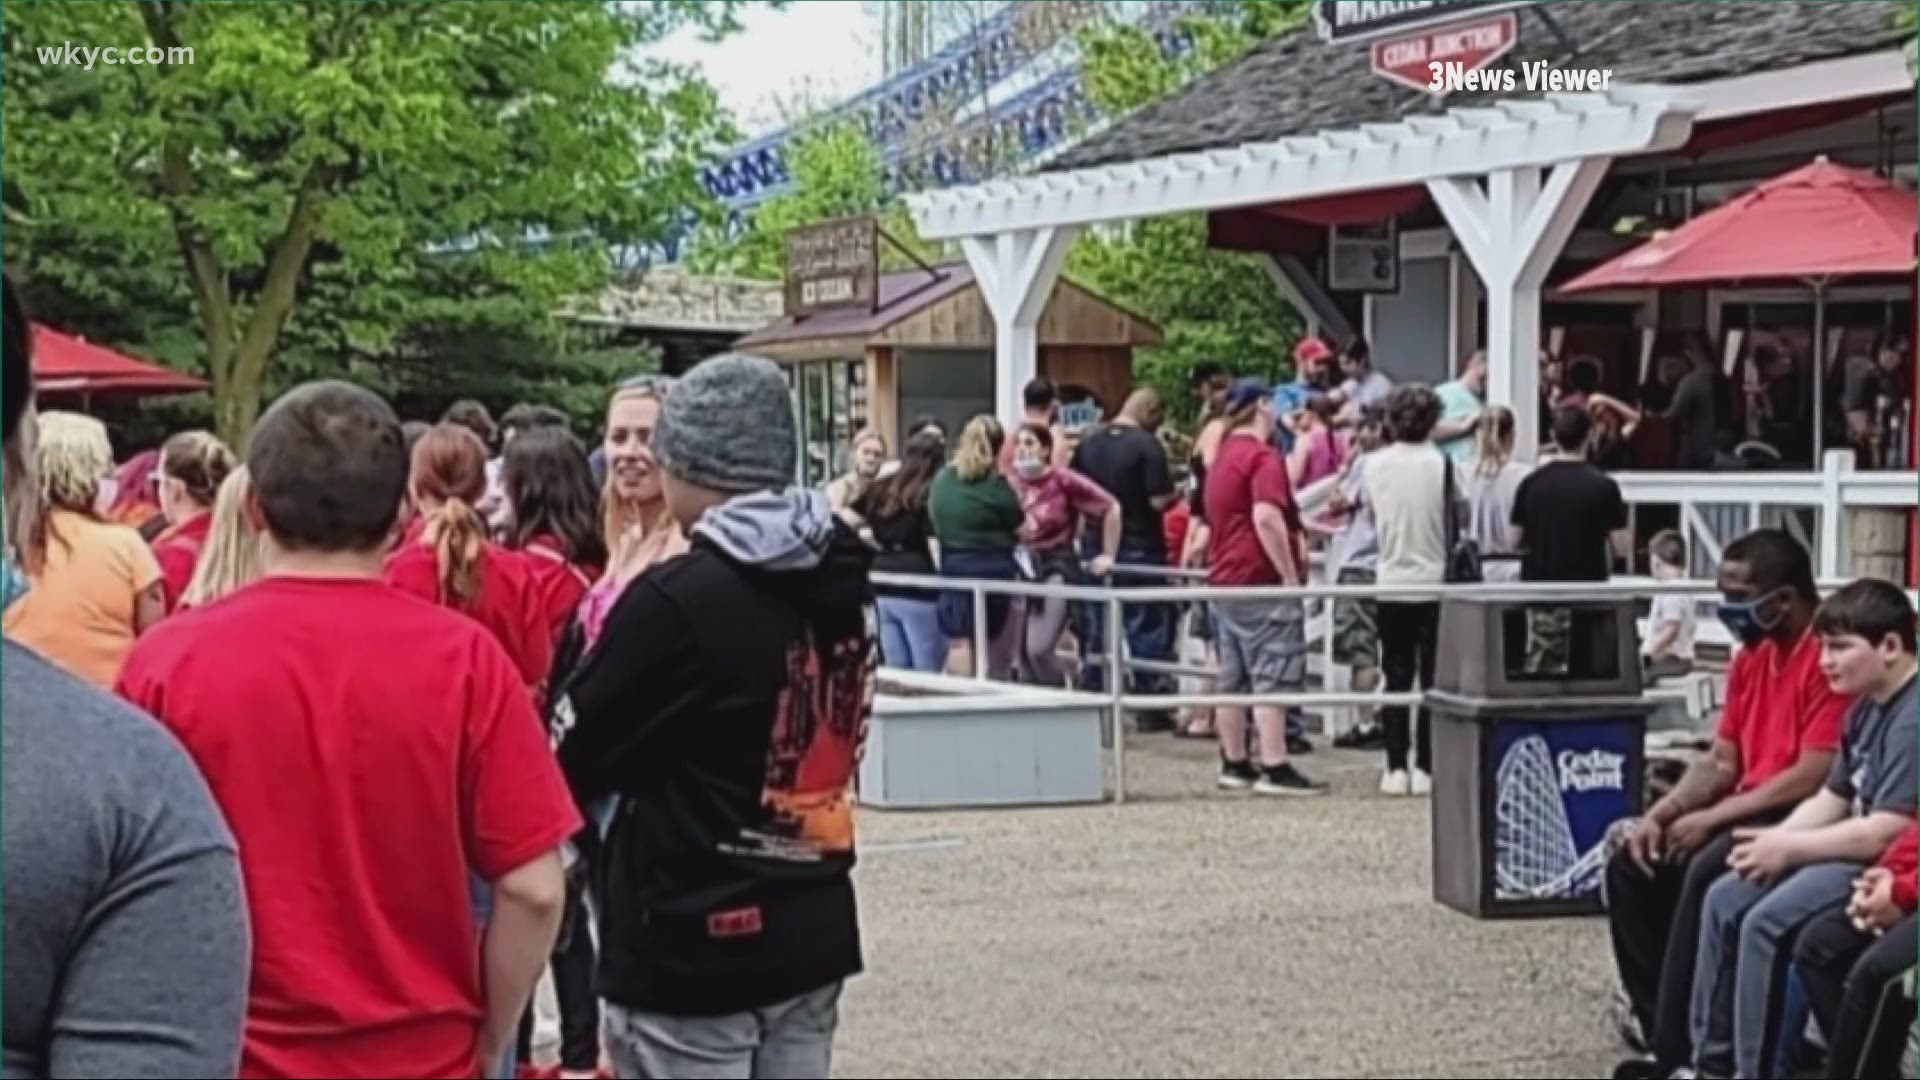 Cedar Point responds to complaints of long lines, closed rides and understaffed areas on opening weekend.